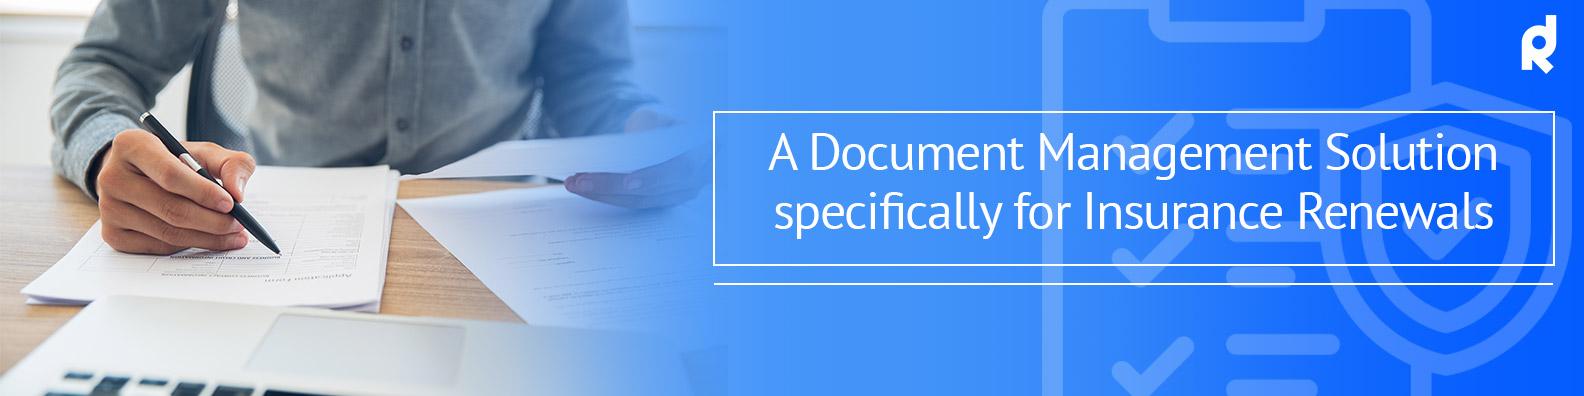 Product A Document Management Solution for Insurance Renewals - Refined Data image